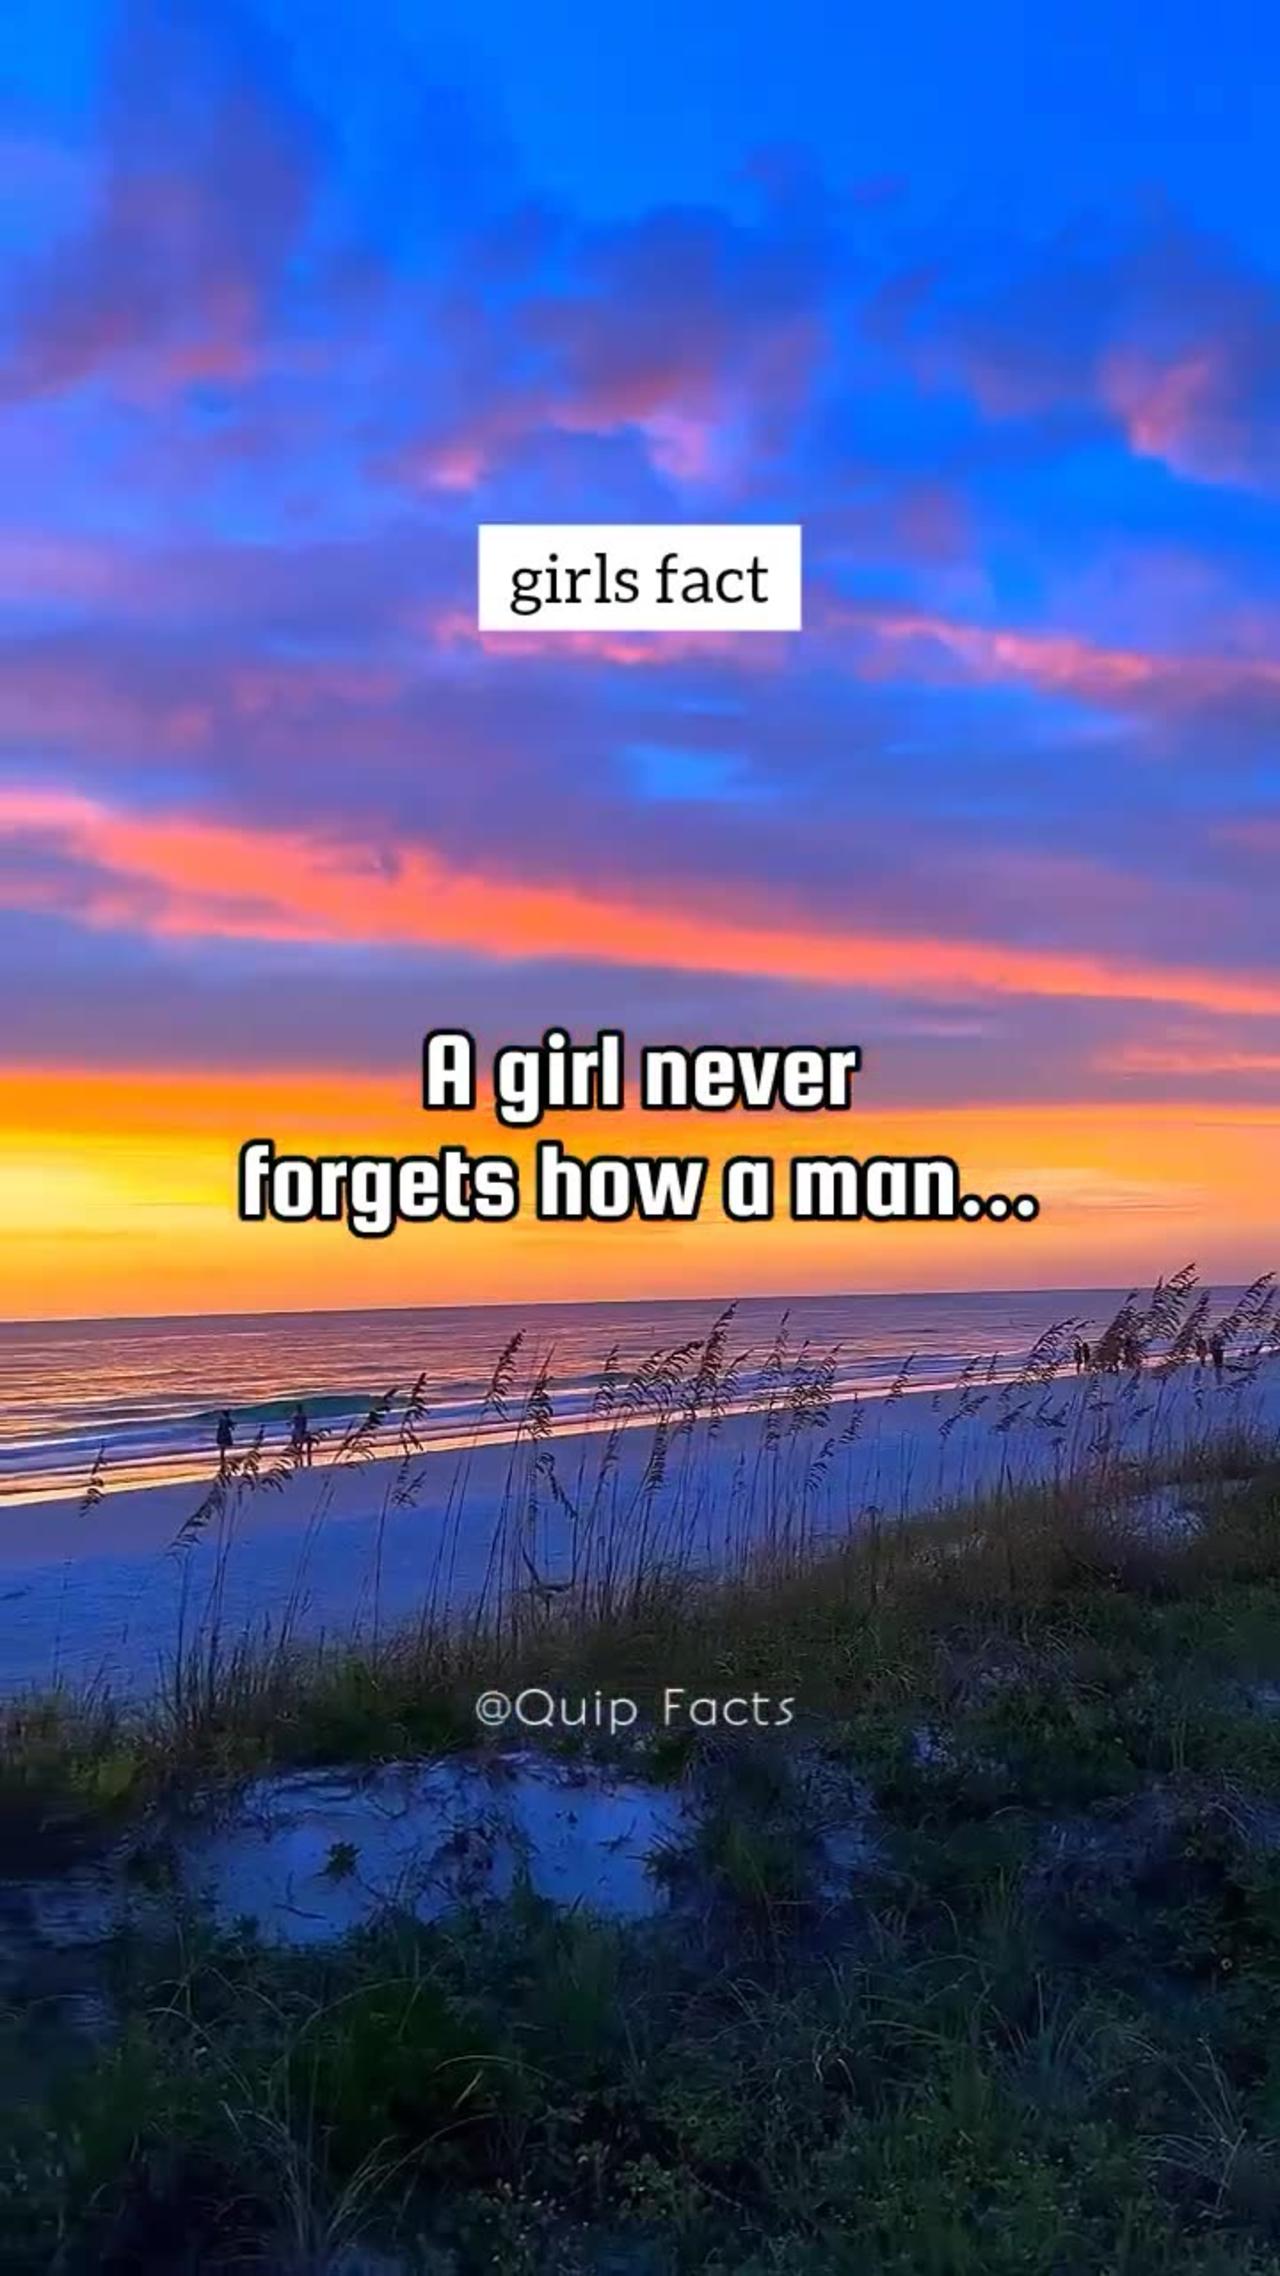 A girl never forgets how a man...#psychologyfacts #girlsfacts #facts